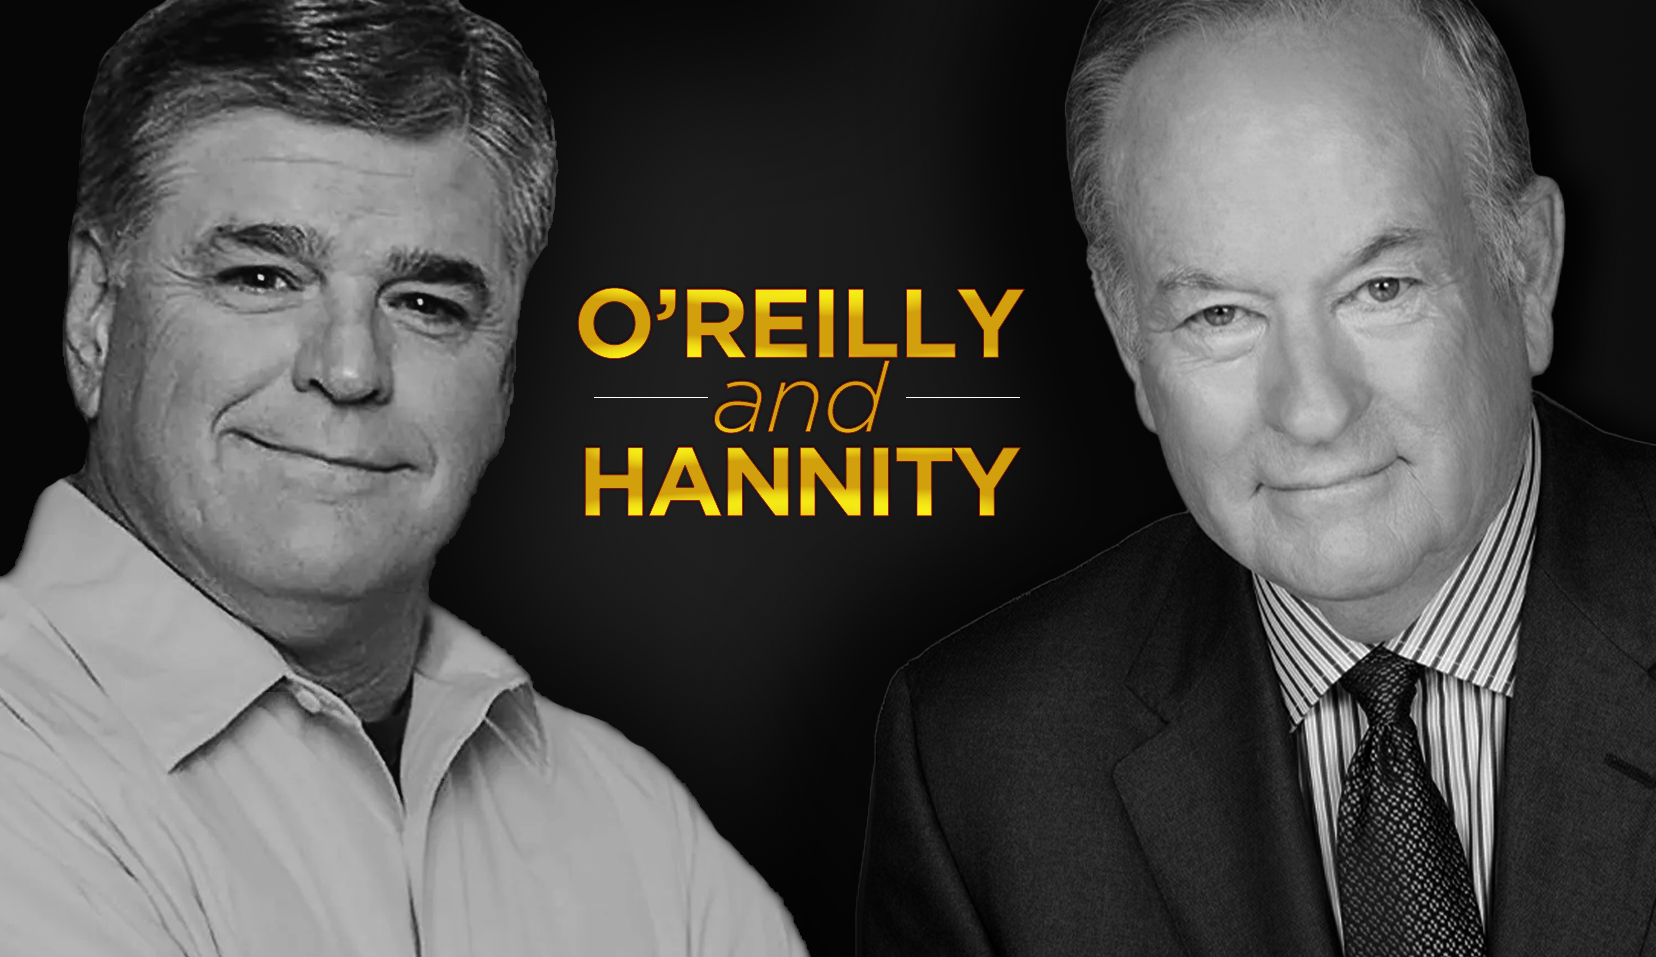 Listen: O'Reilly & Hannity Discuss the Capitol Riot, Conspiracy Theories, Nancy Pelosi and More